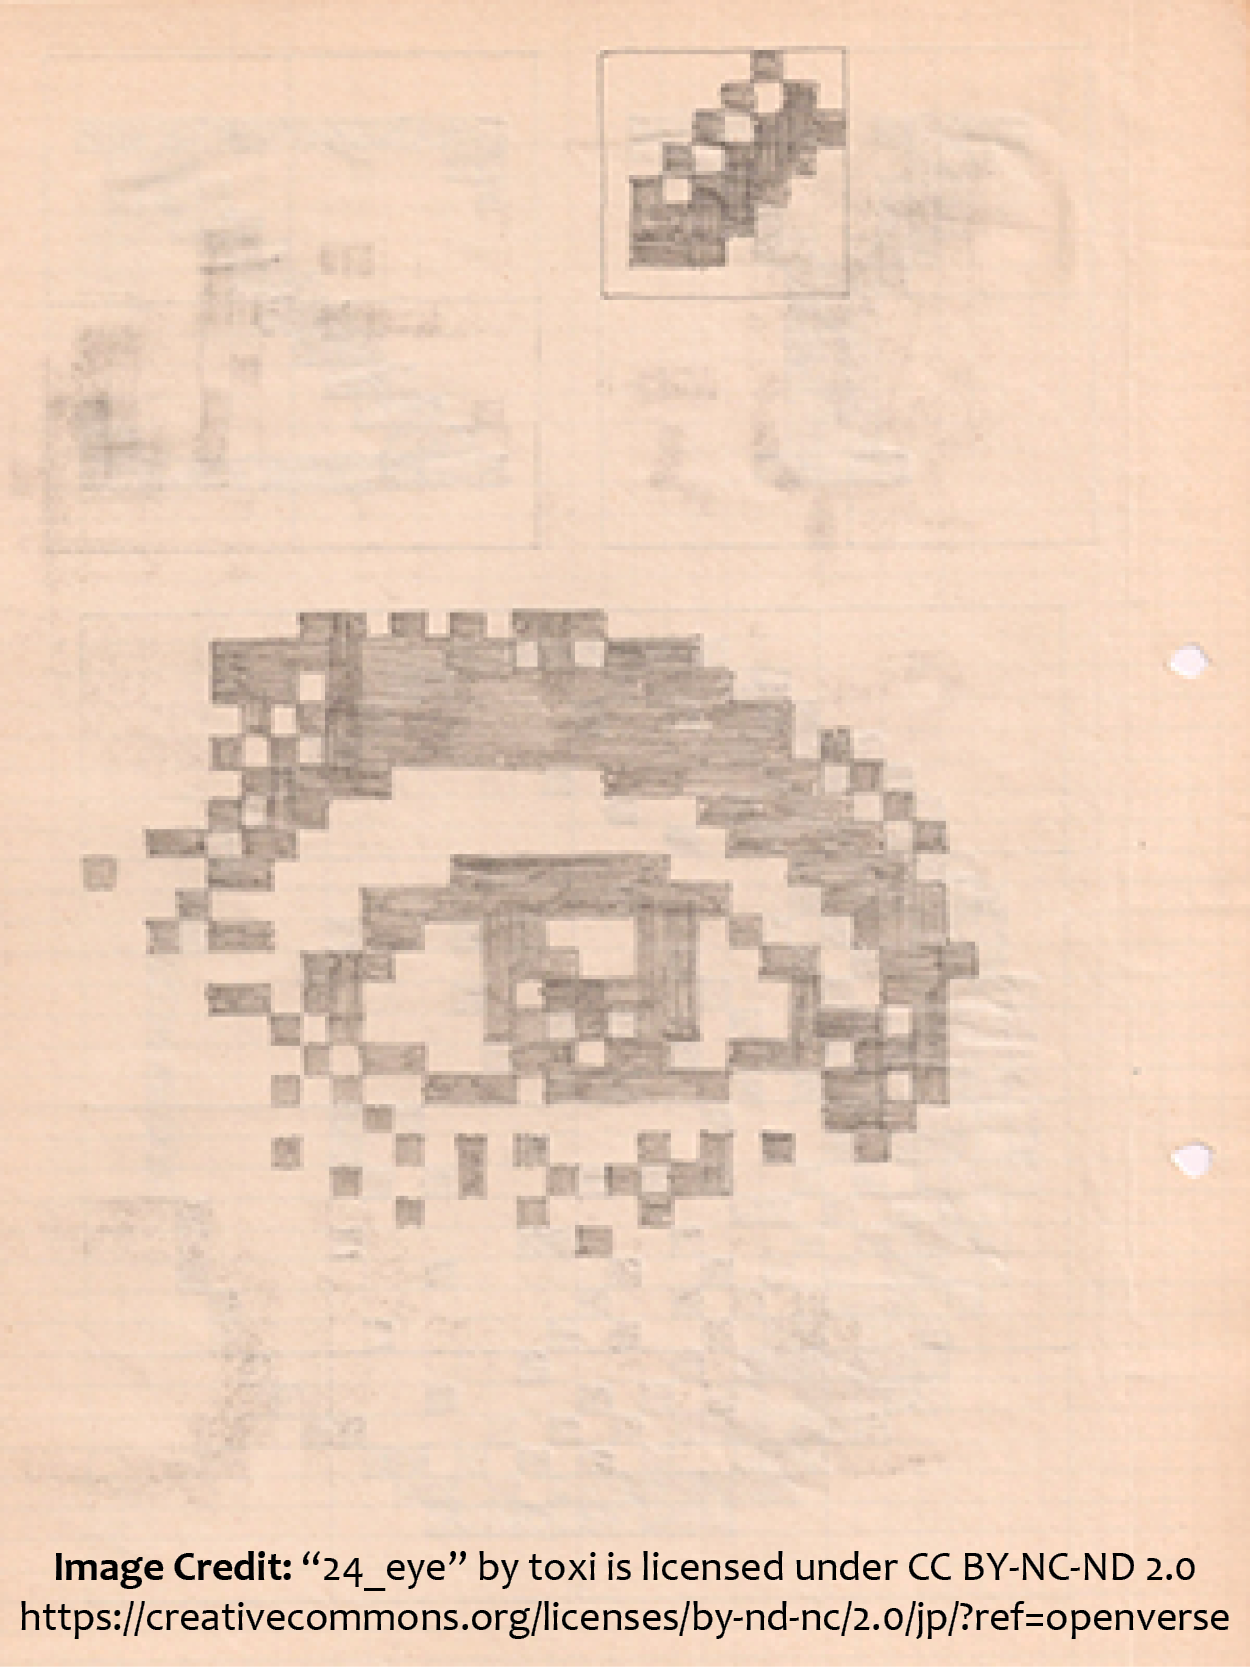 Creative Commons photo of a human eye and object, pencil-drawn in large 'pixels' on aging, yellowed paper with notebook holes.